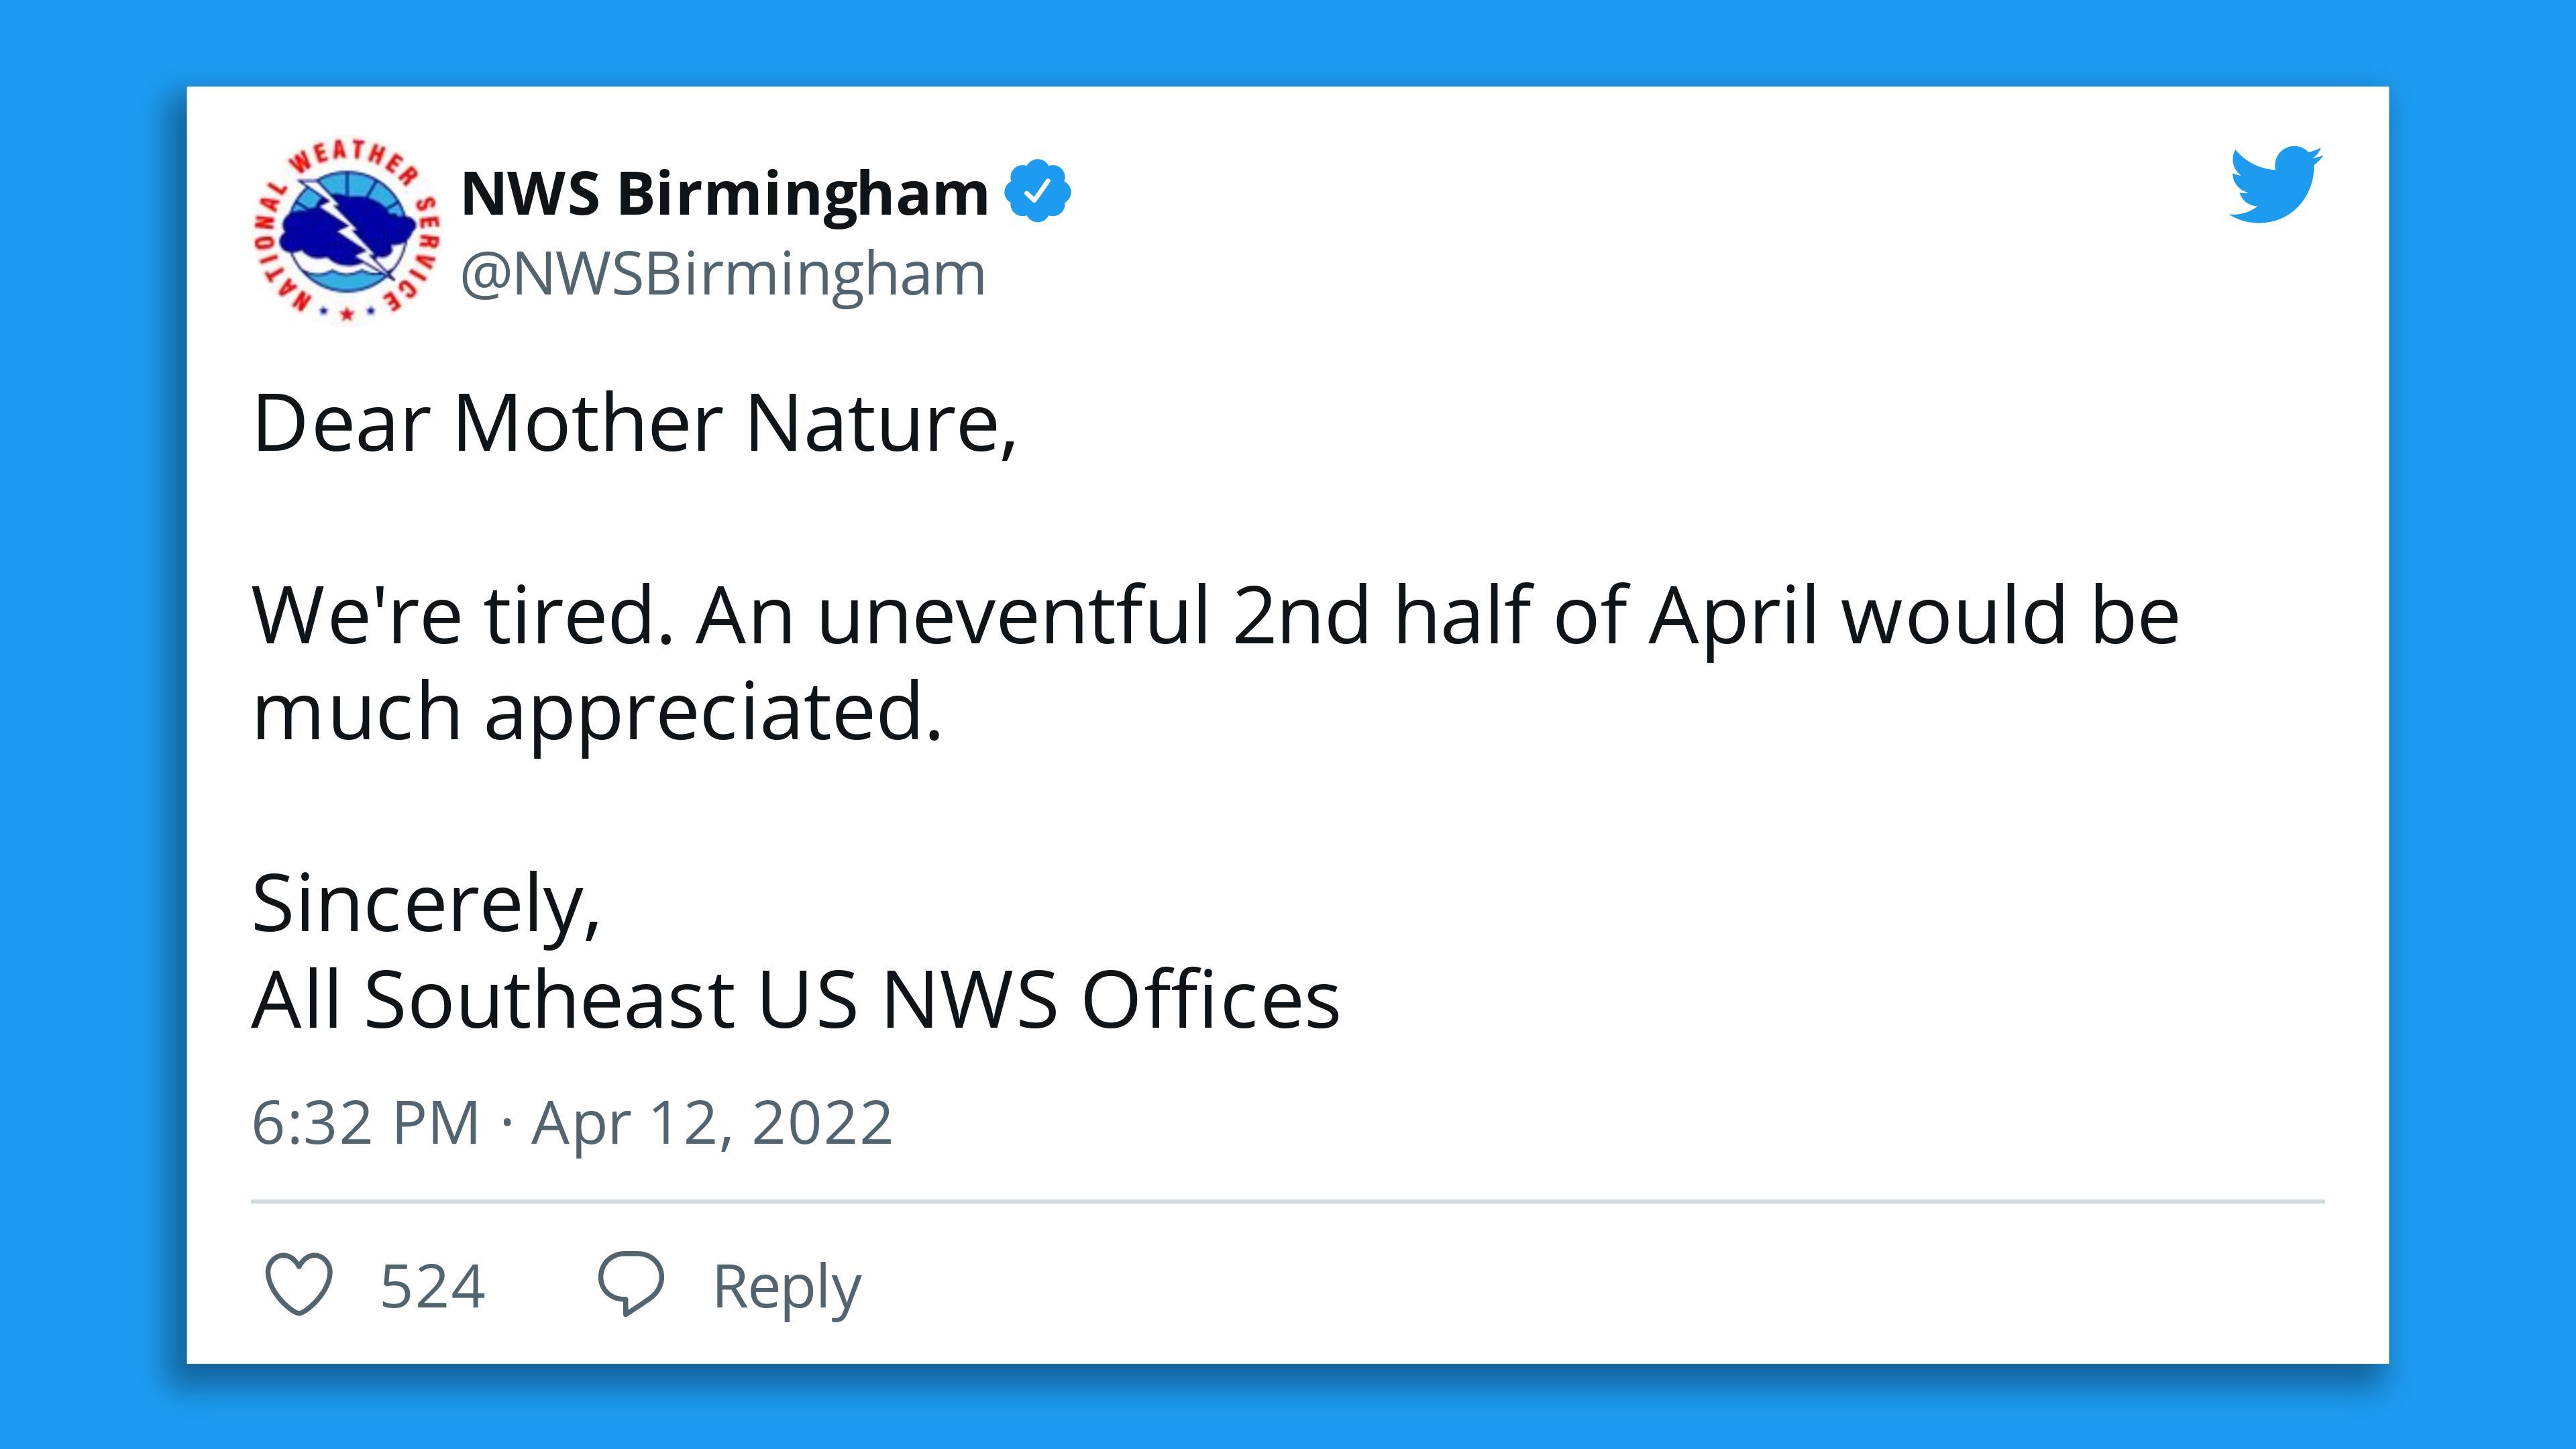 A tweet by NWS Birmingham asking the weather to be quieter in the second half of April after getting slammed at the start.